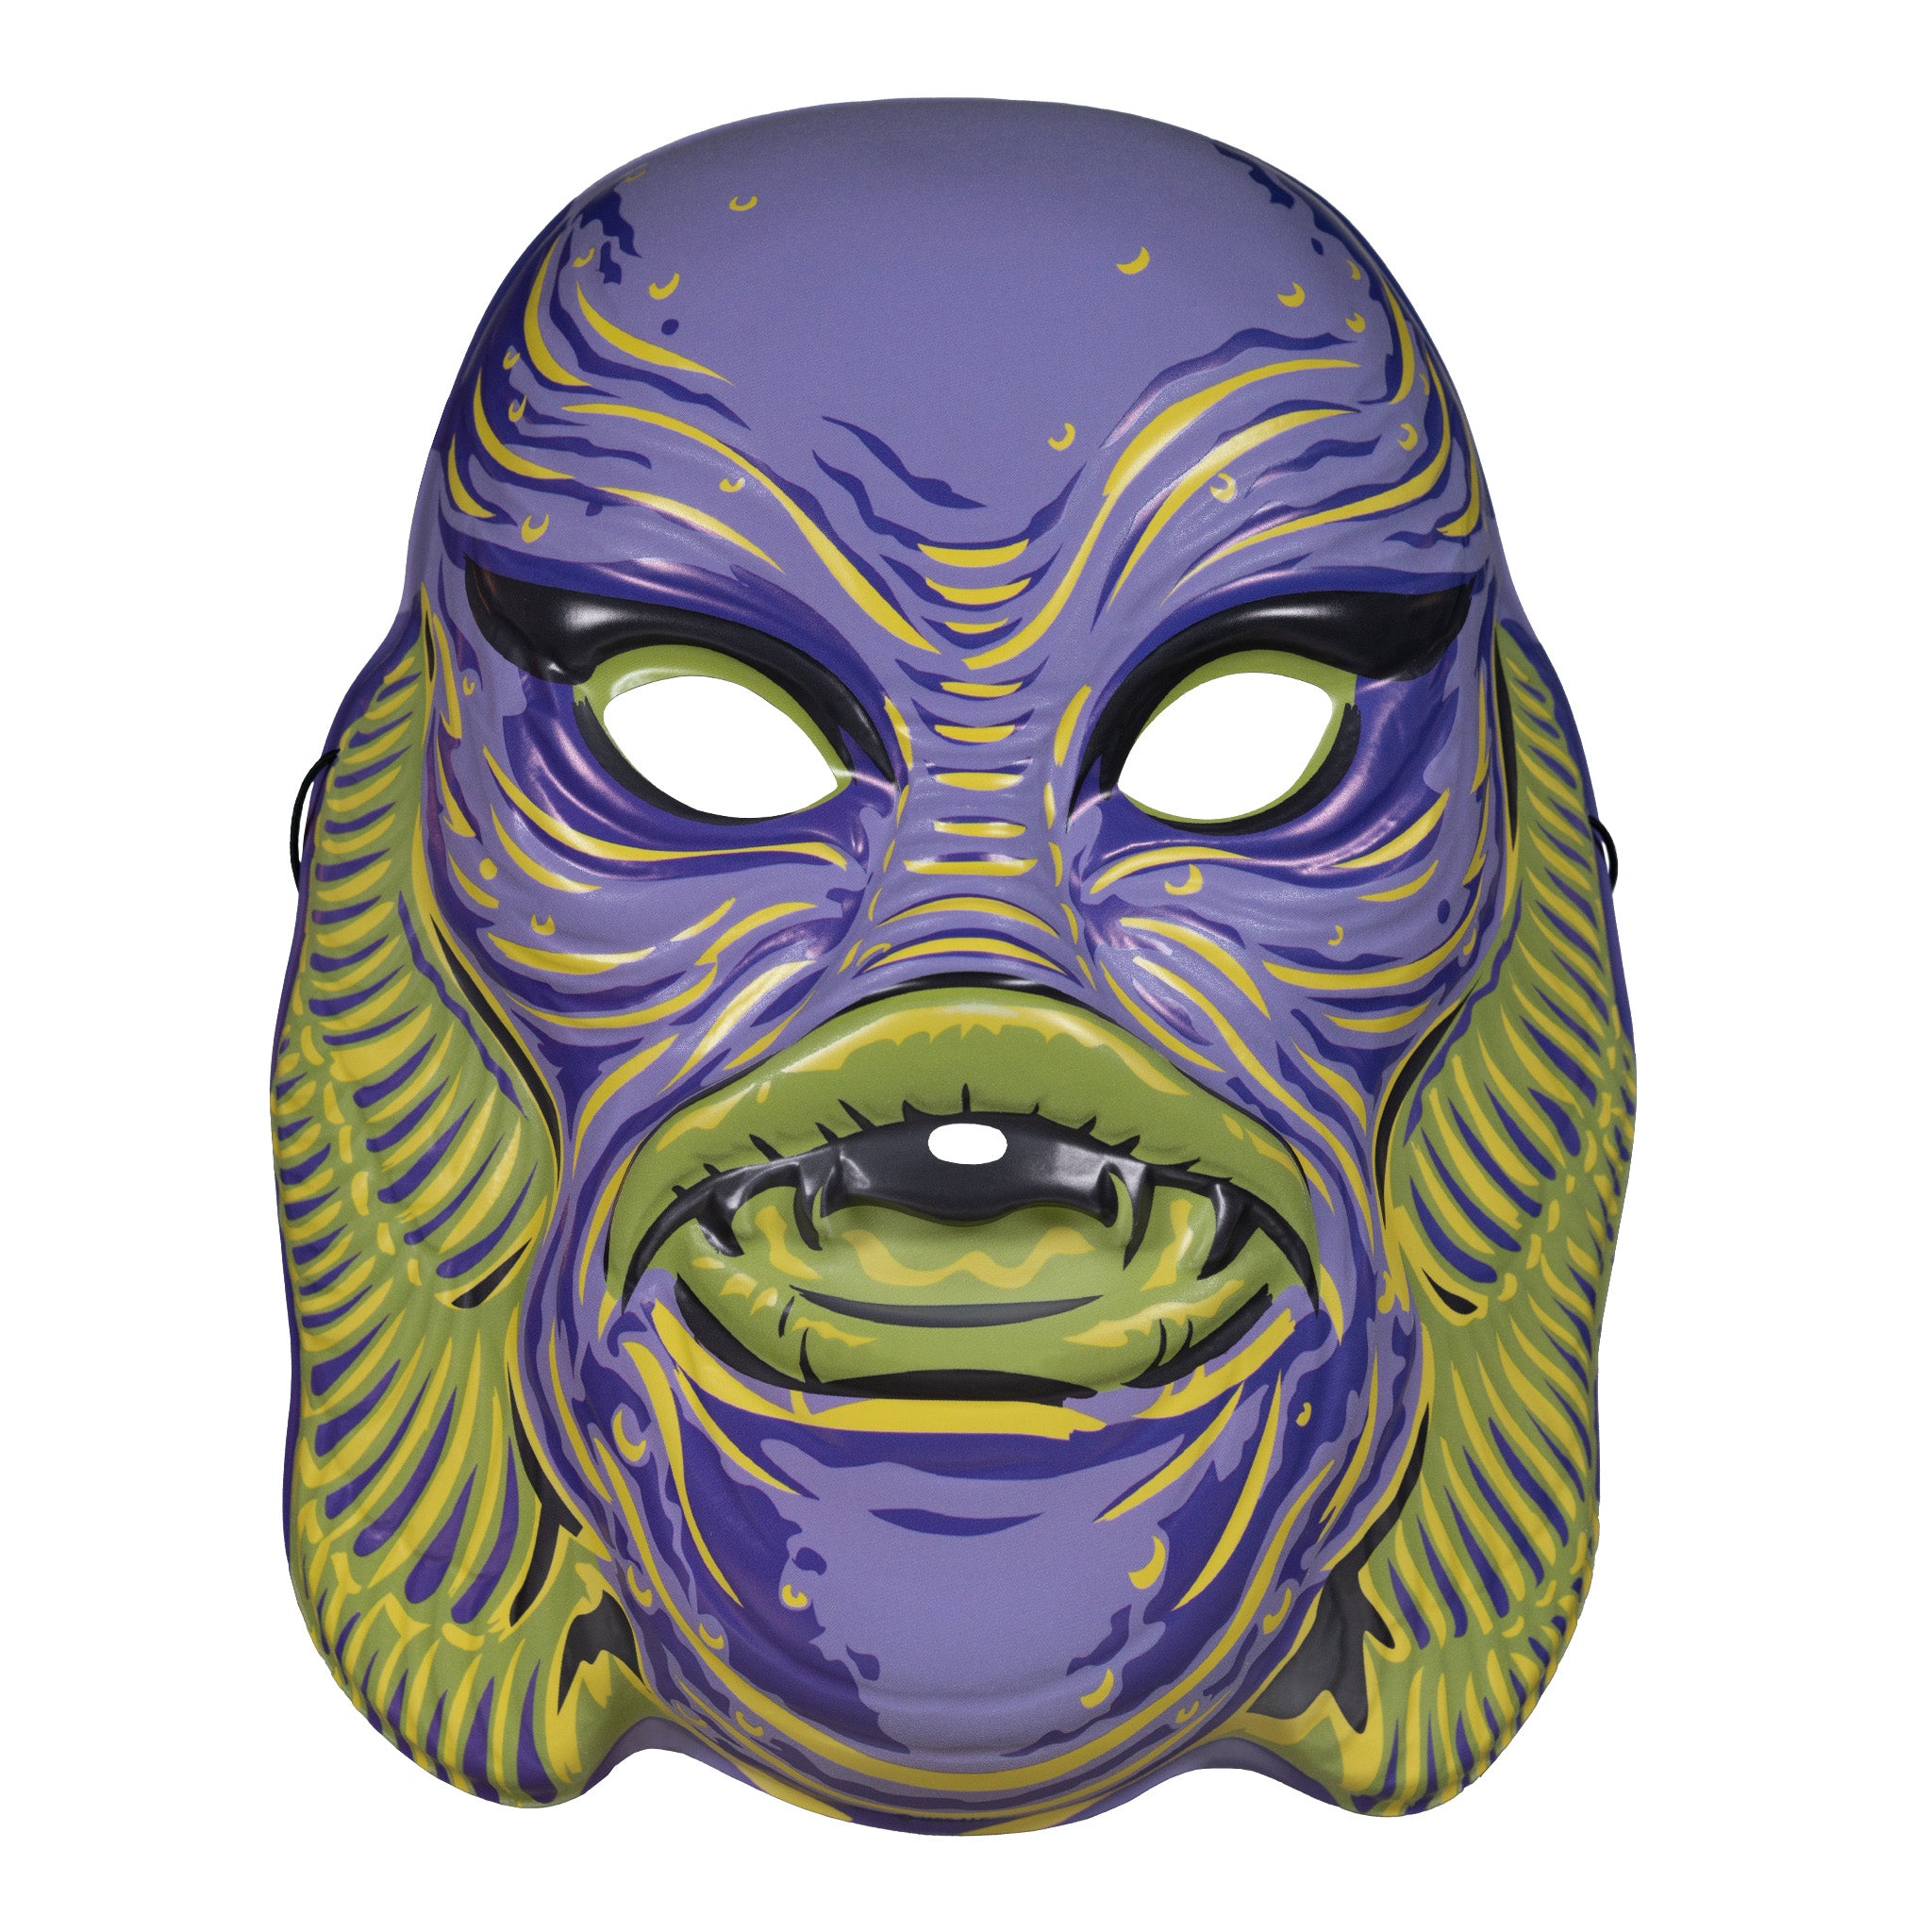 Universal Monsters Mask - Creature from the Black Lagoon (Glow)